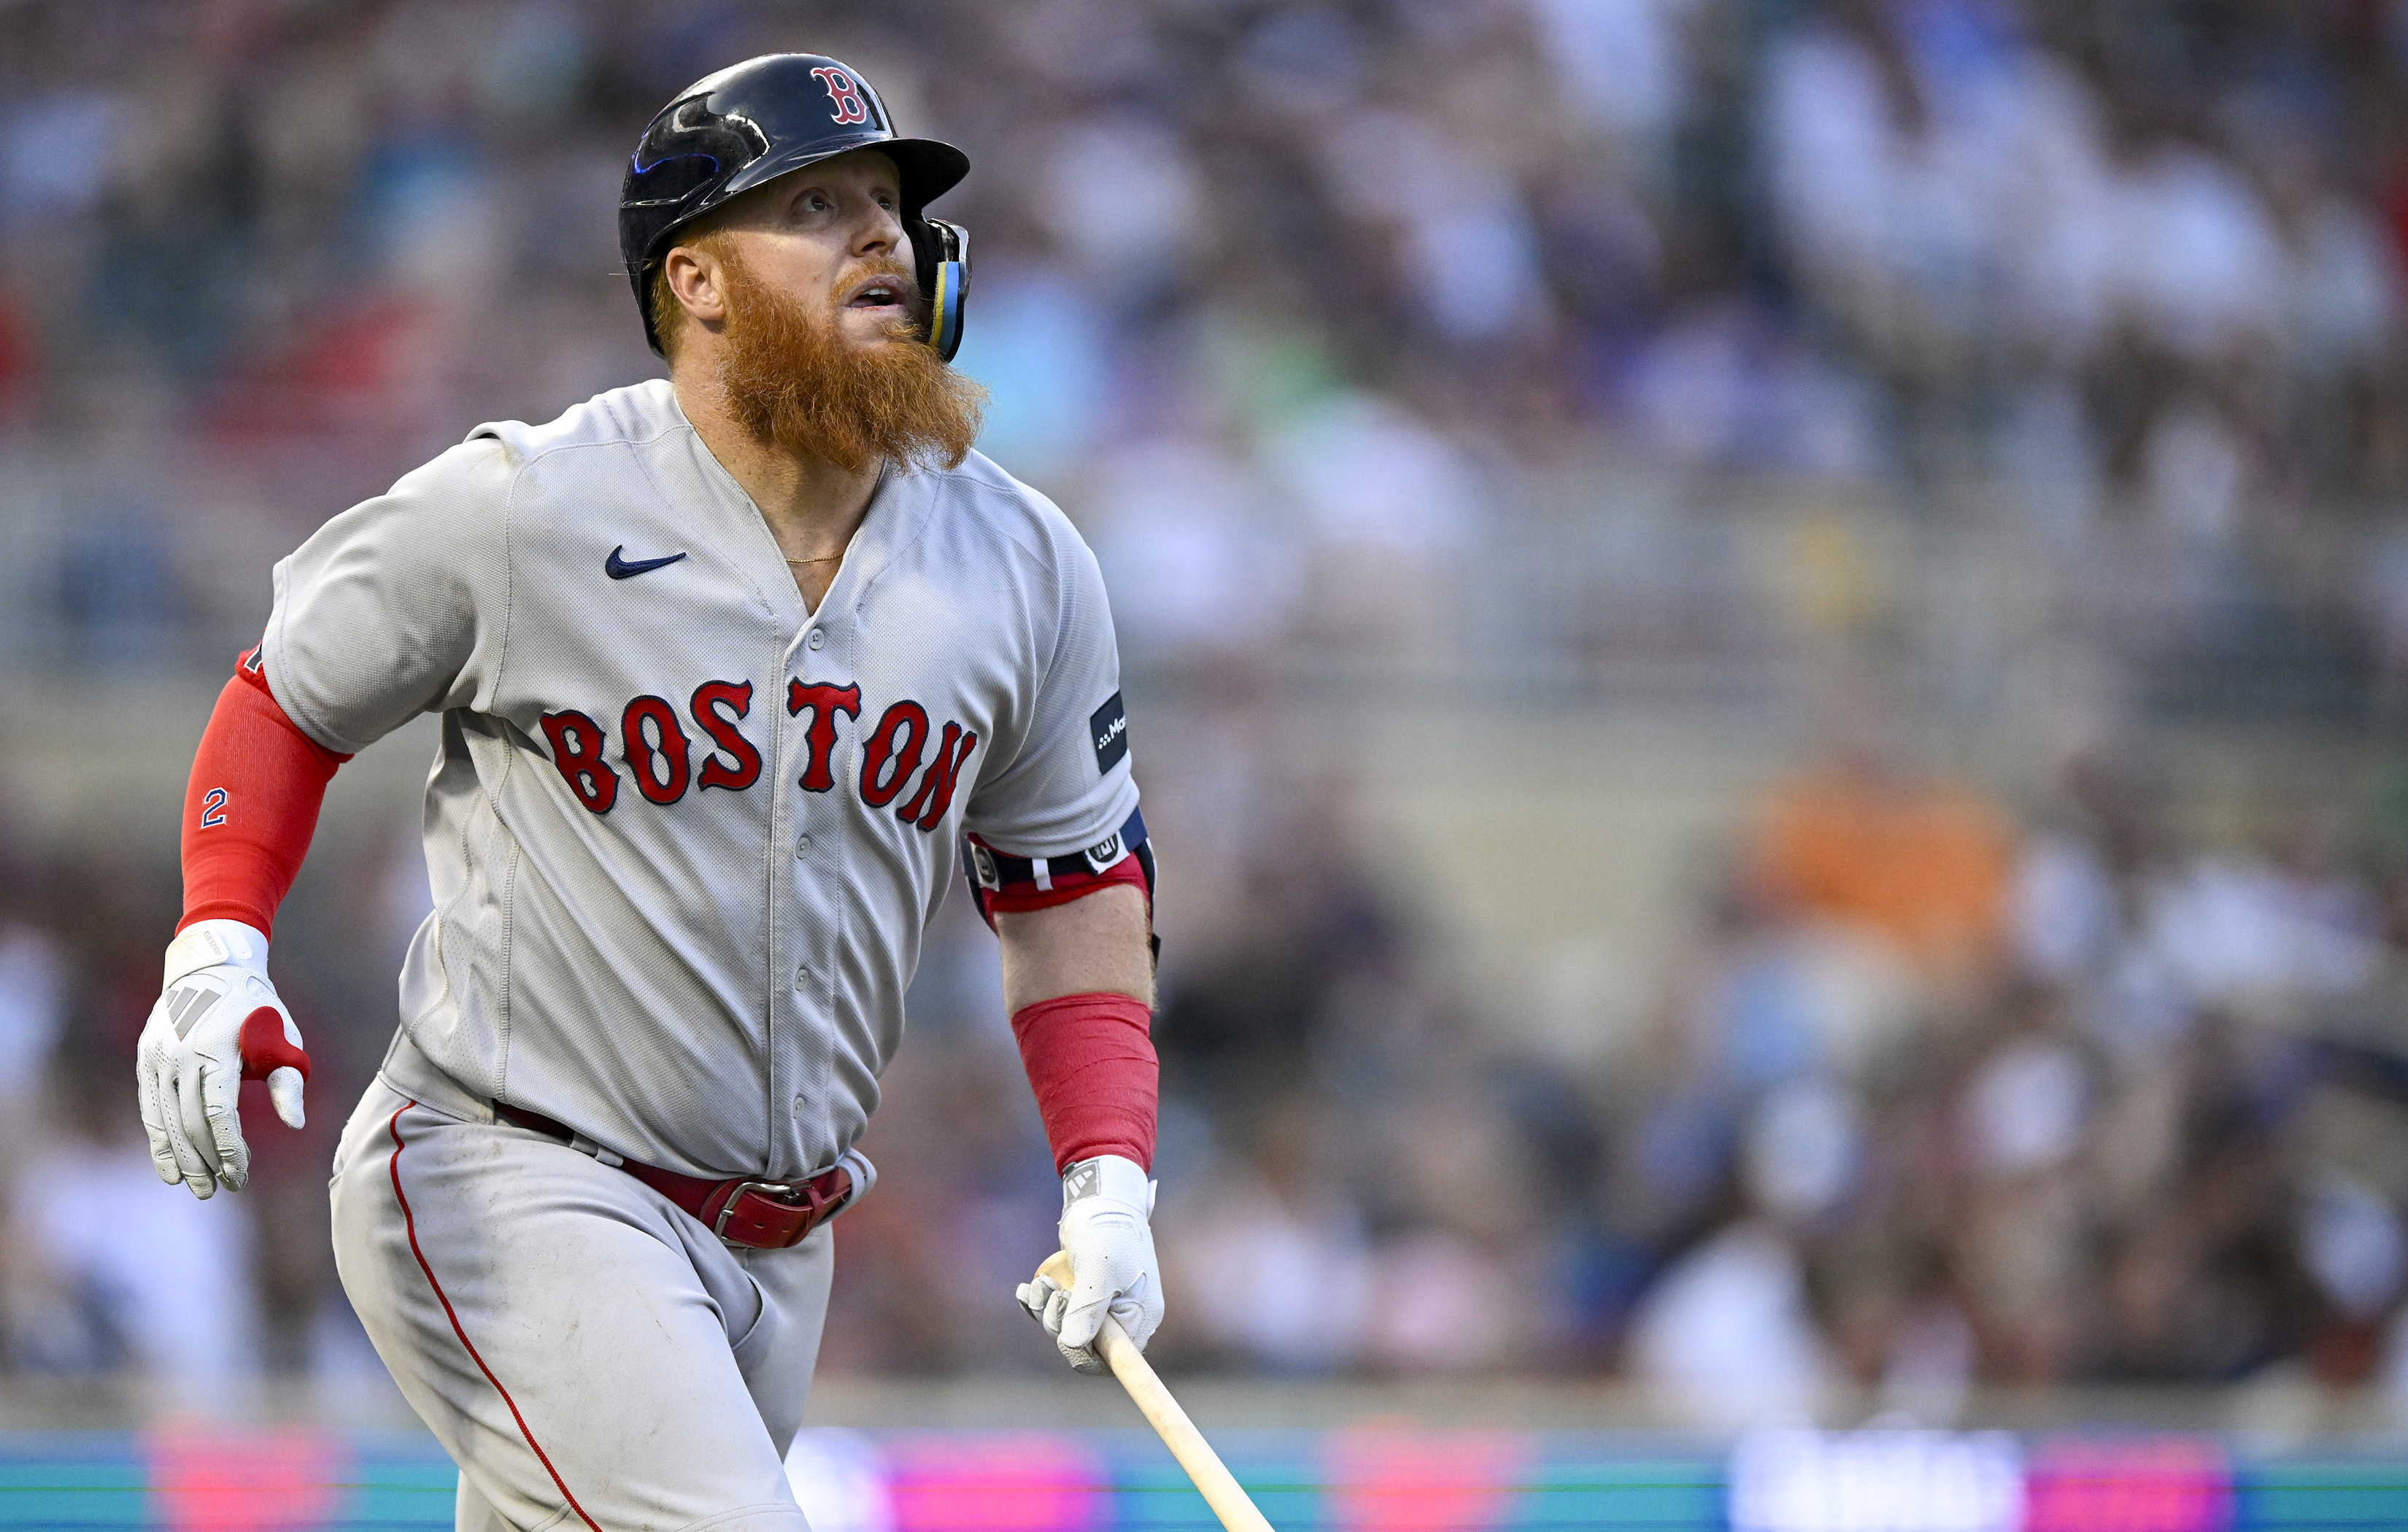 Arroyo has 5 hits, 4 RBIs as Red Sox beat Twins 10-4 for 6th straight win